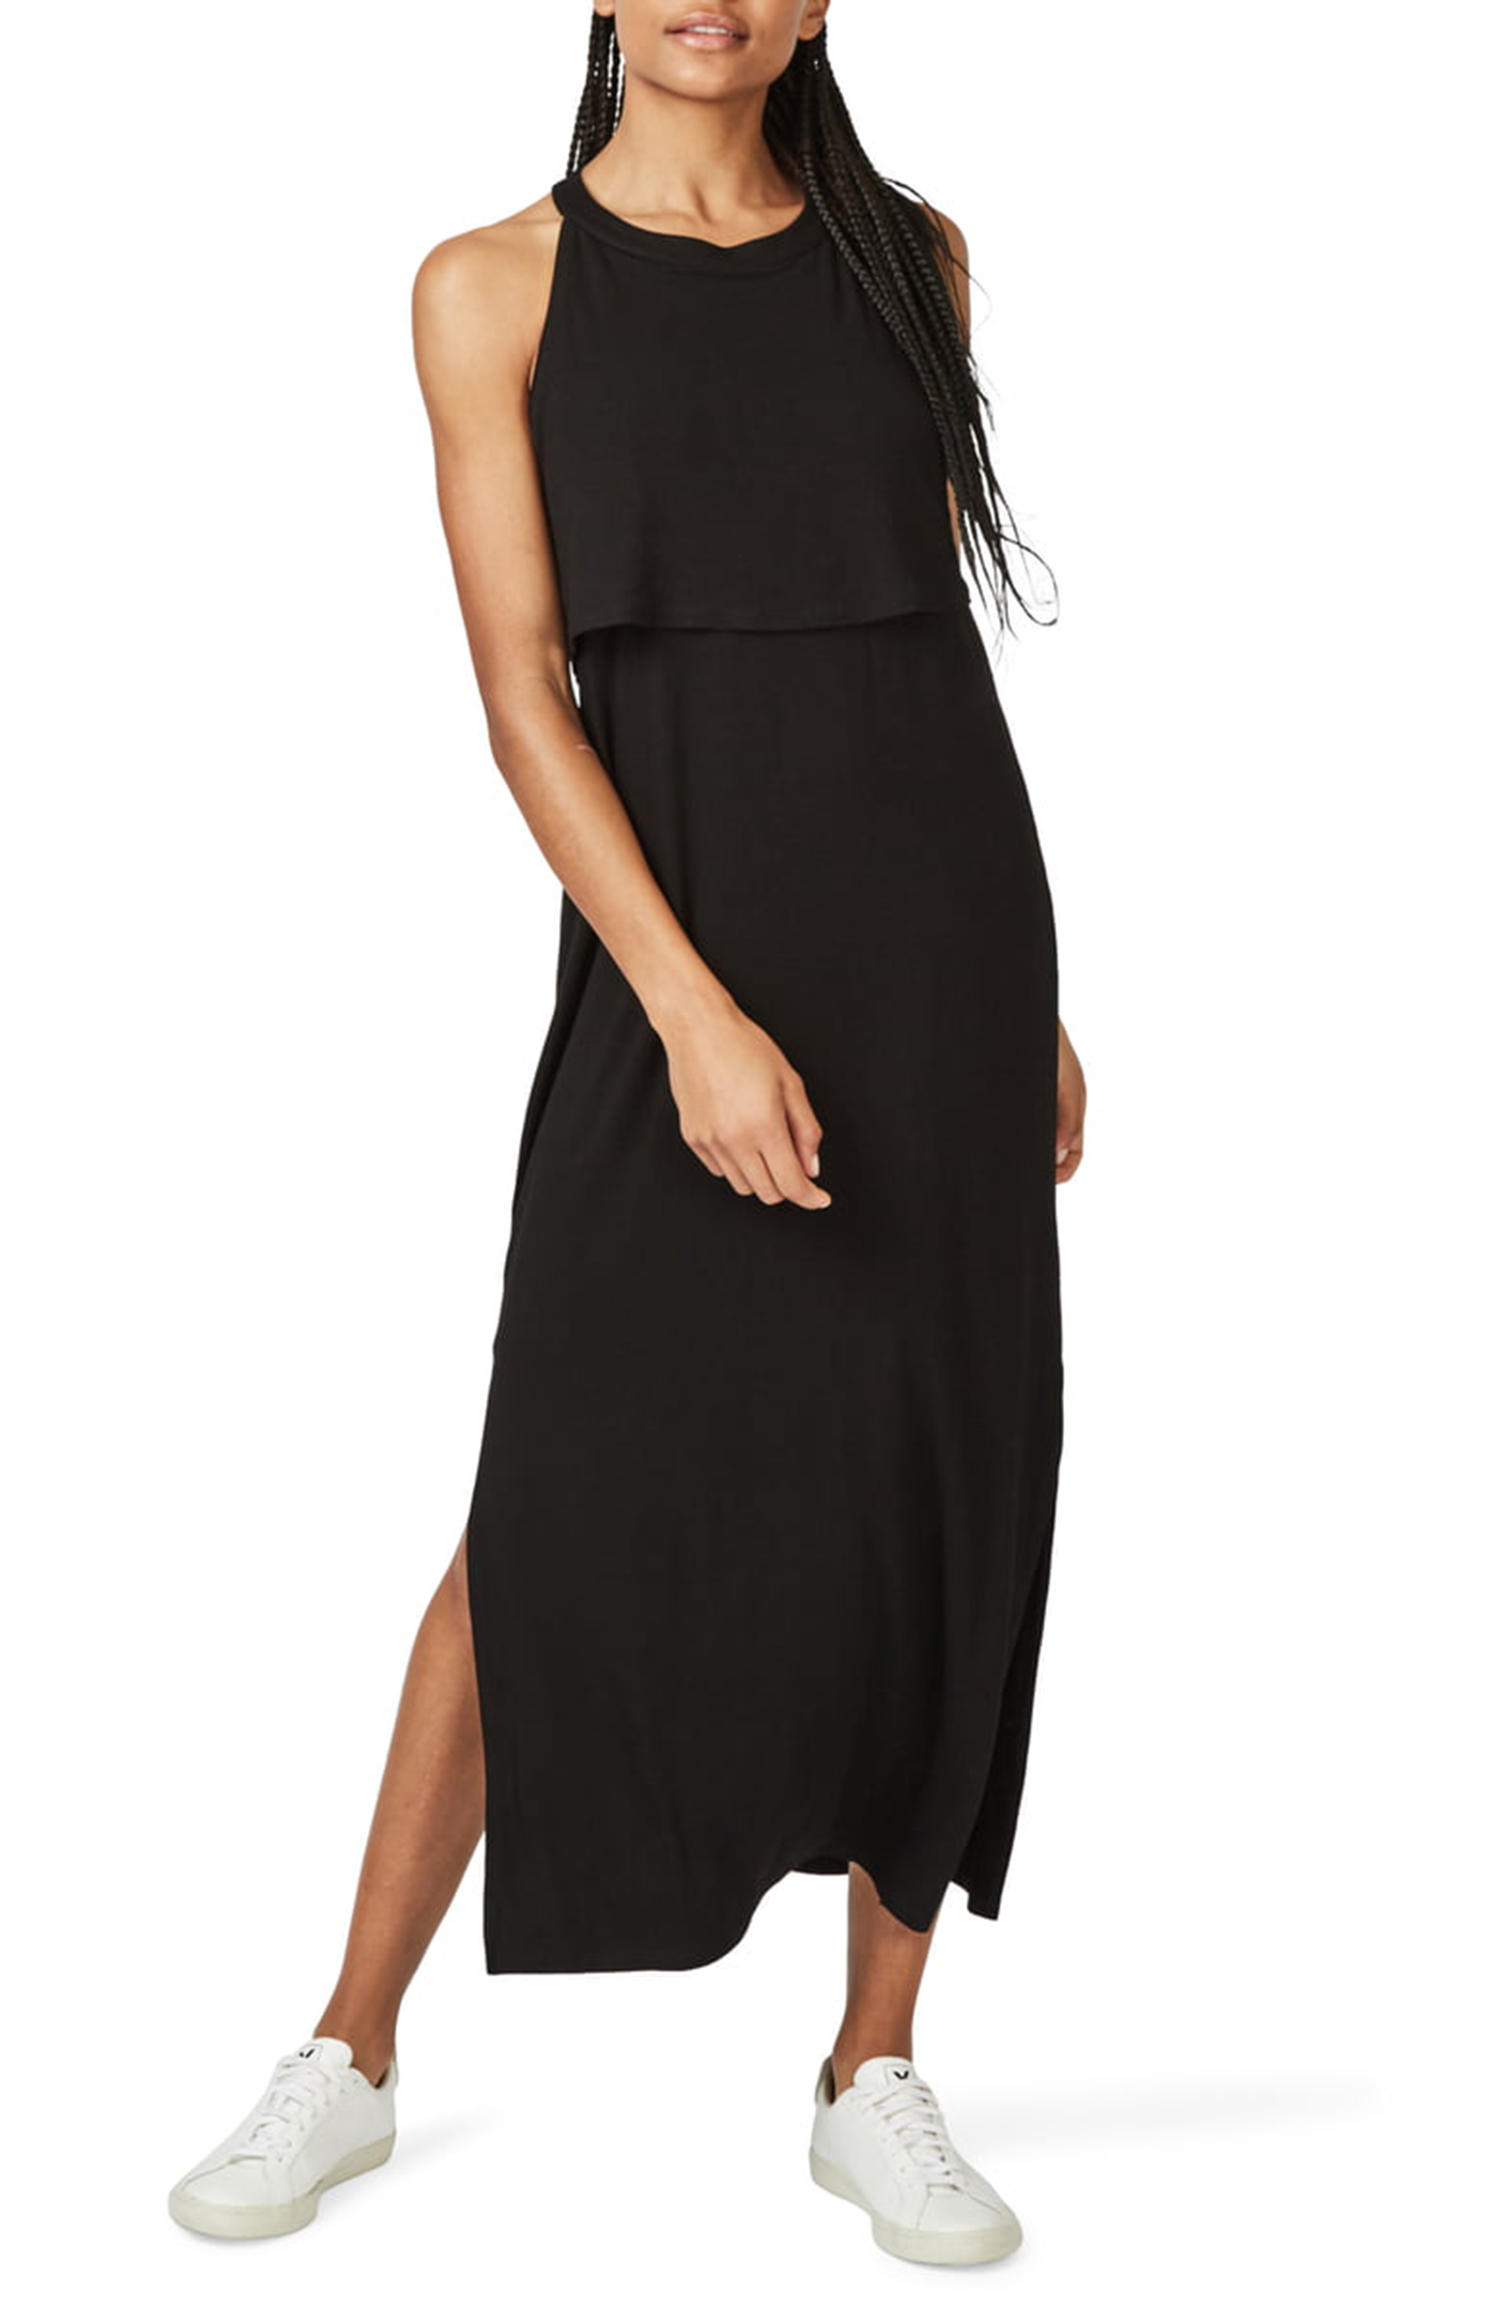 This Black Dress Masters the Art of Comfortable and Chic All at